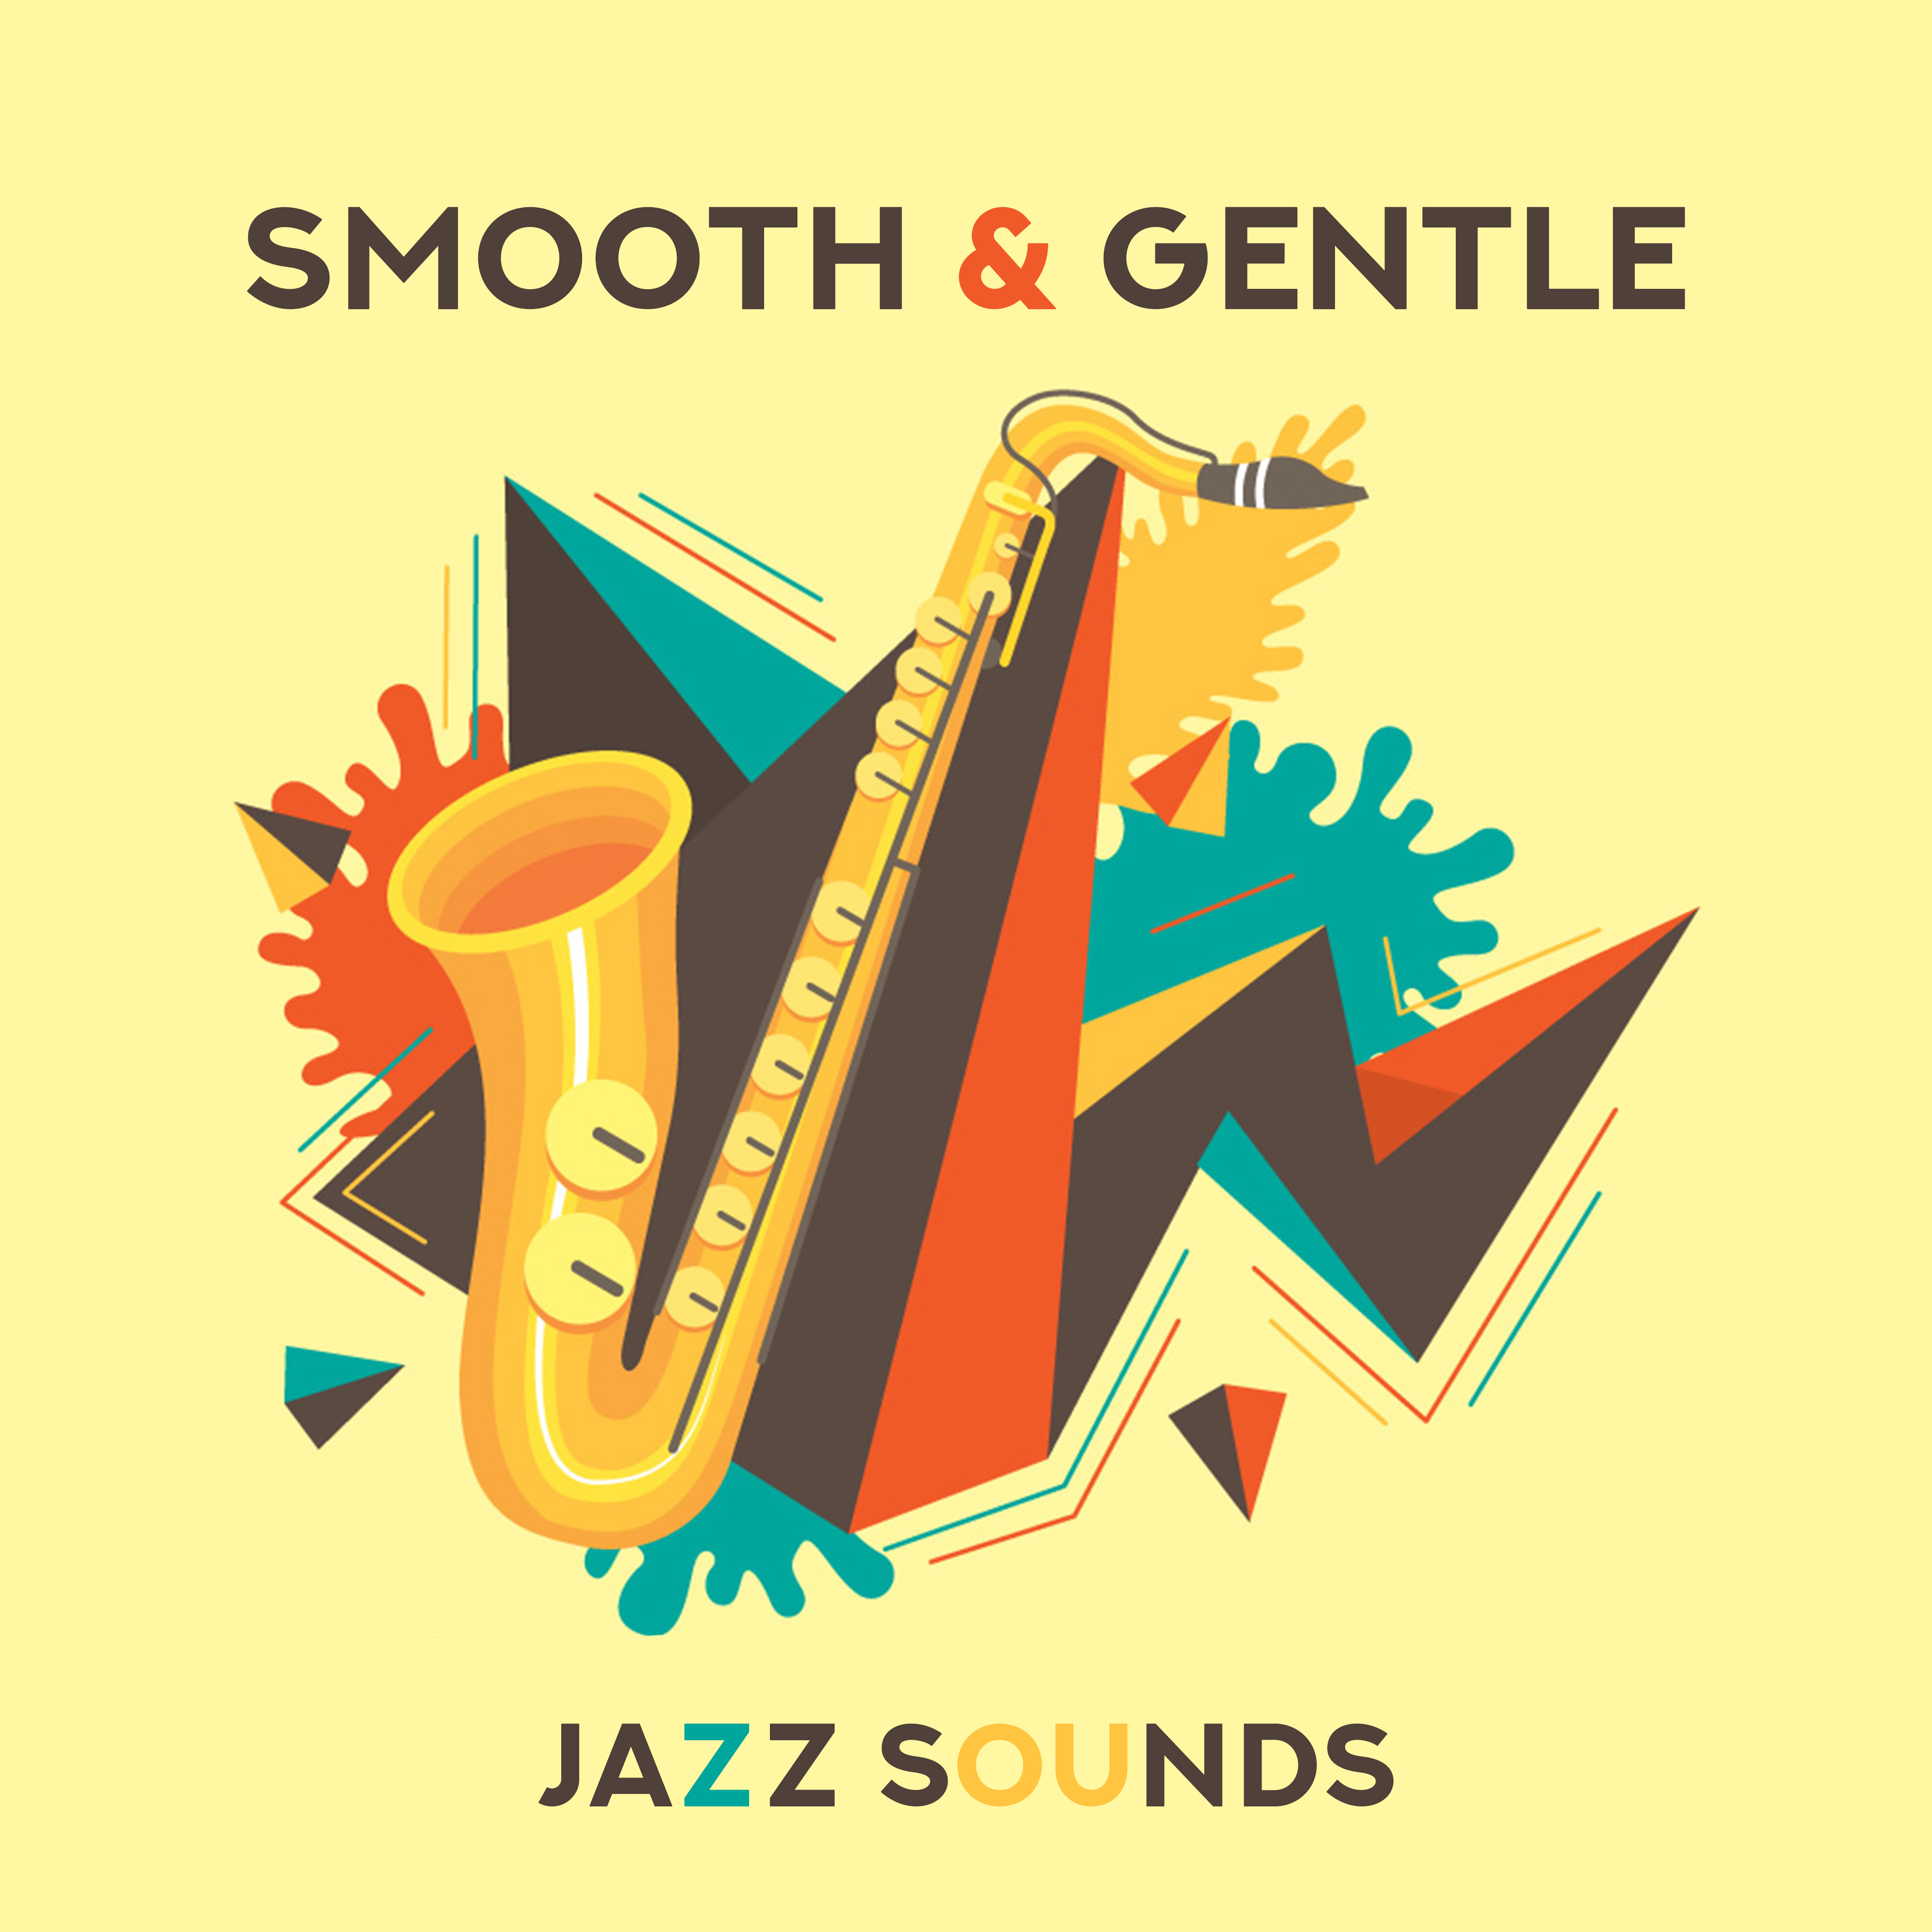 Smooth & Gentle Jazz Sounds